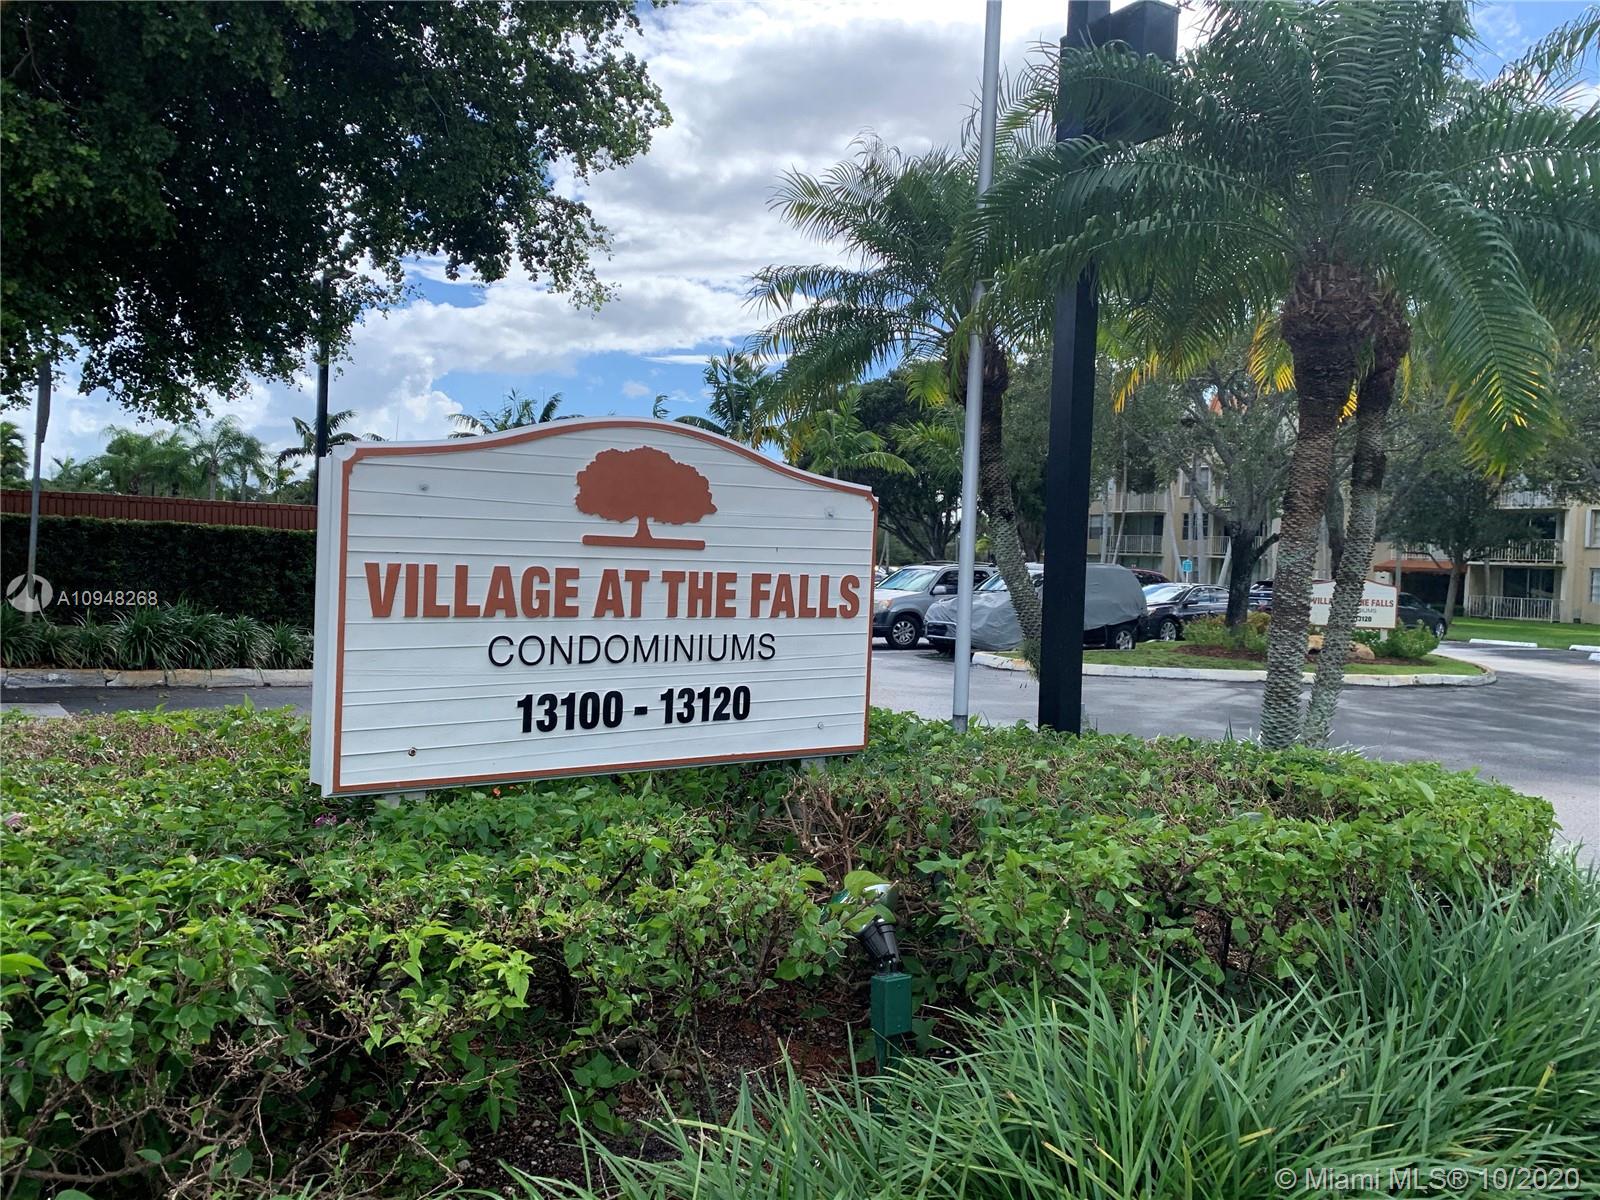 Two bedrooms 2 baths at the desirable Village At The Falls Community